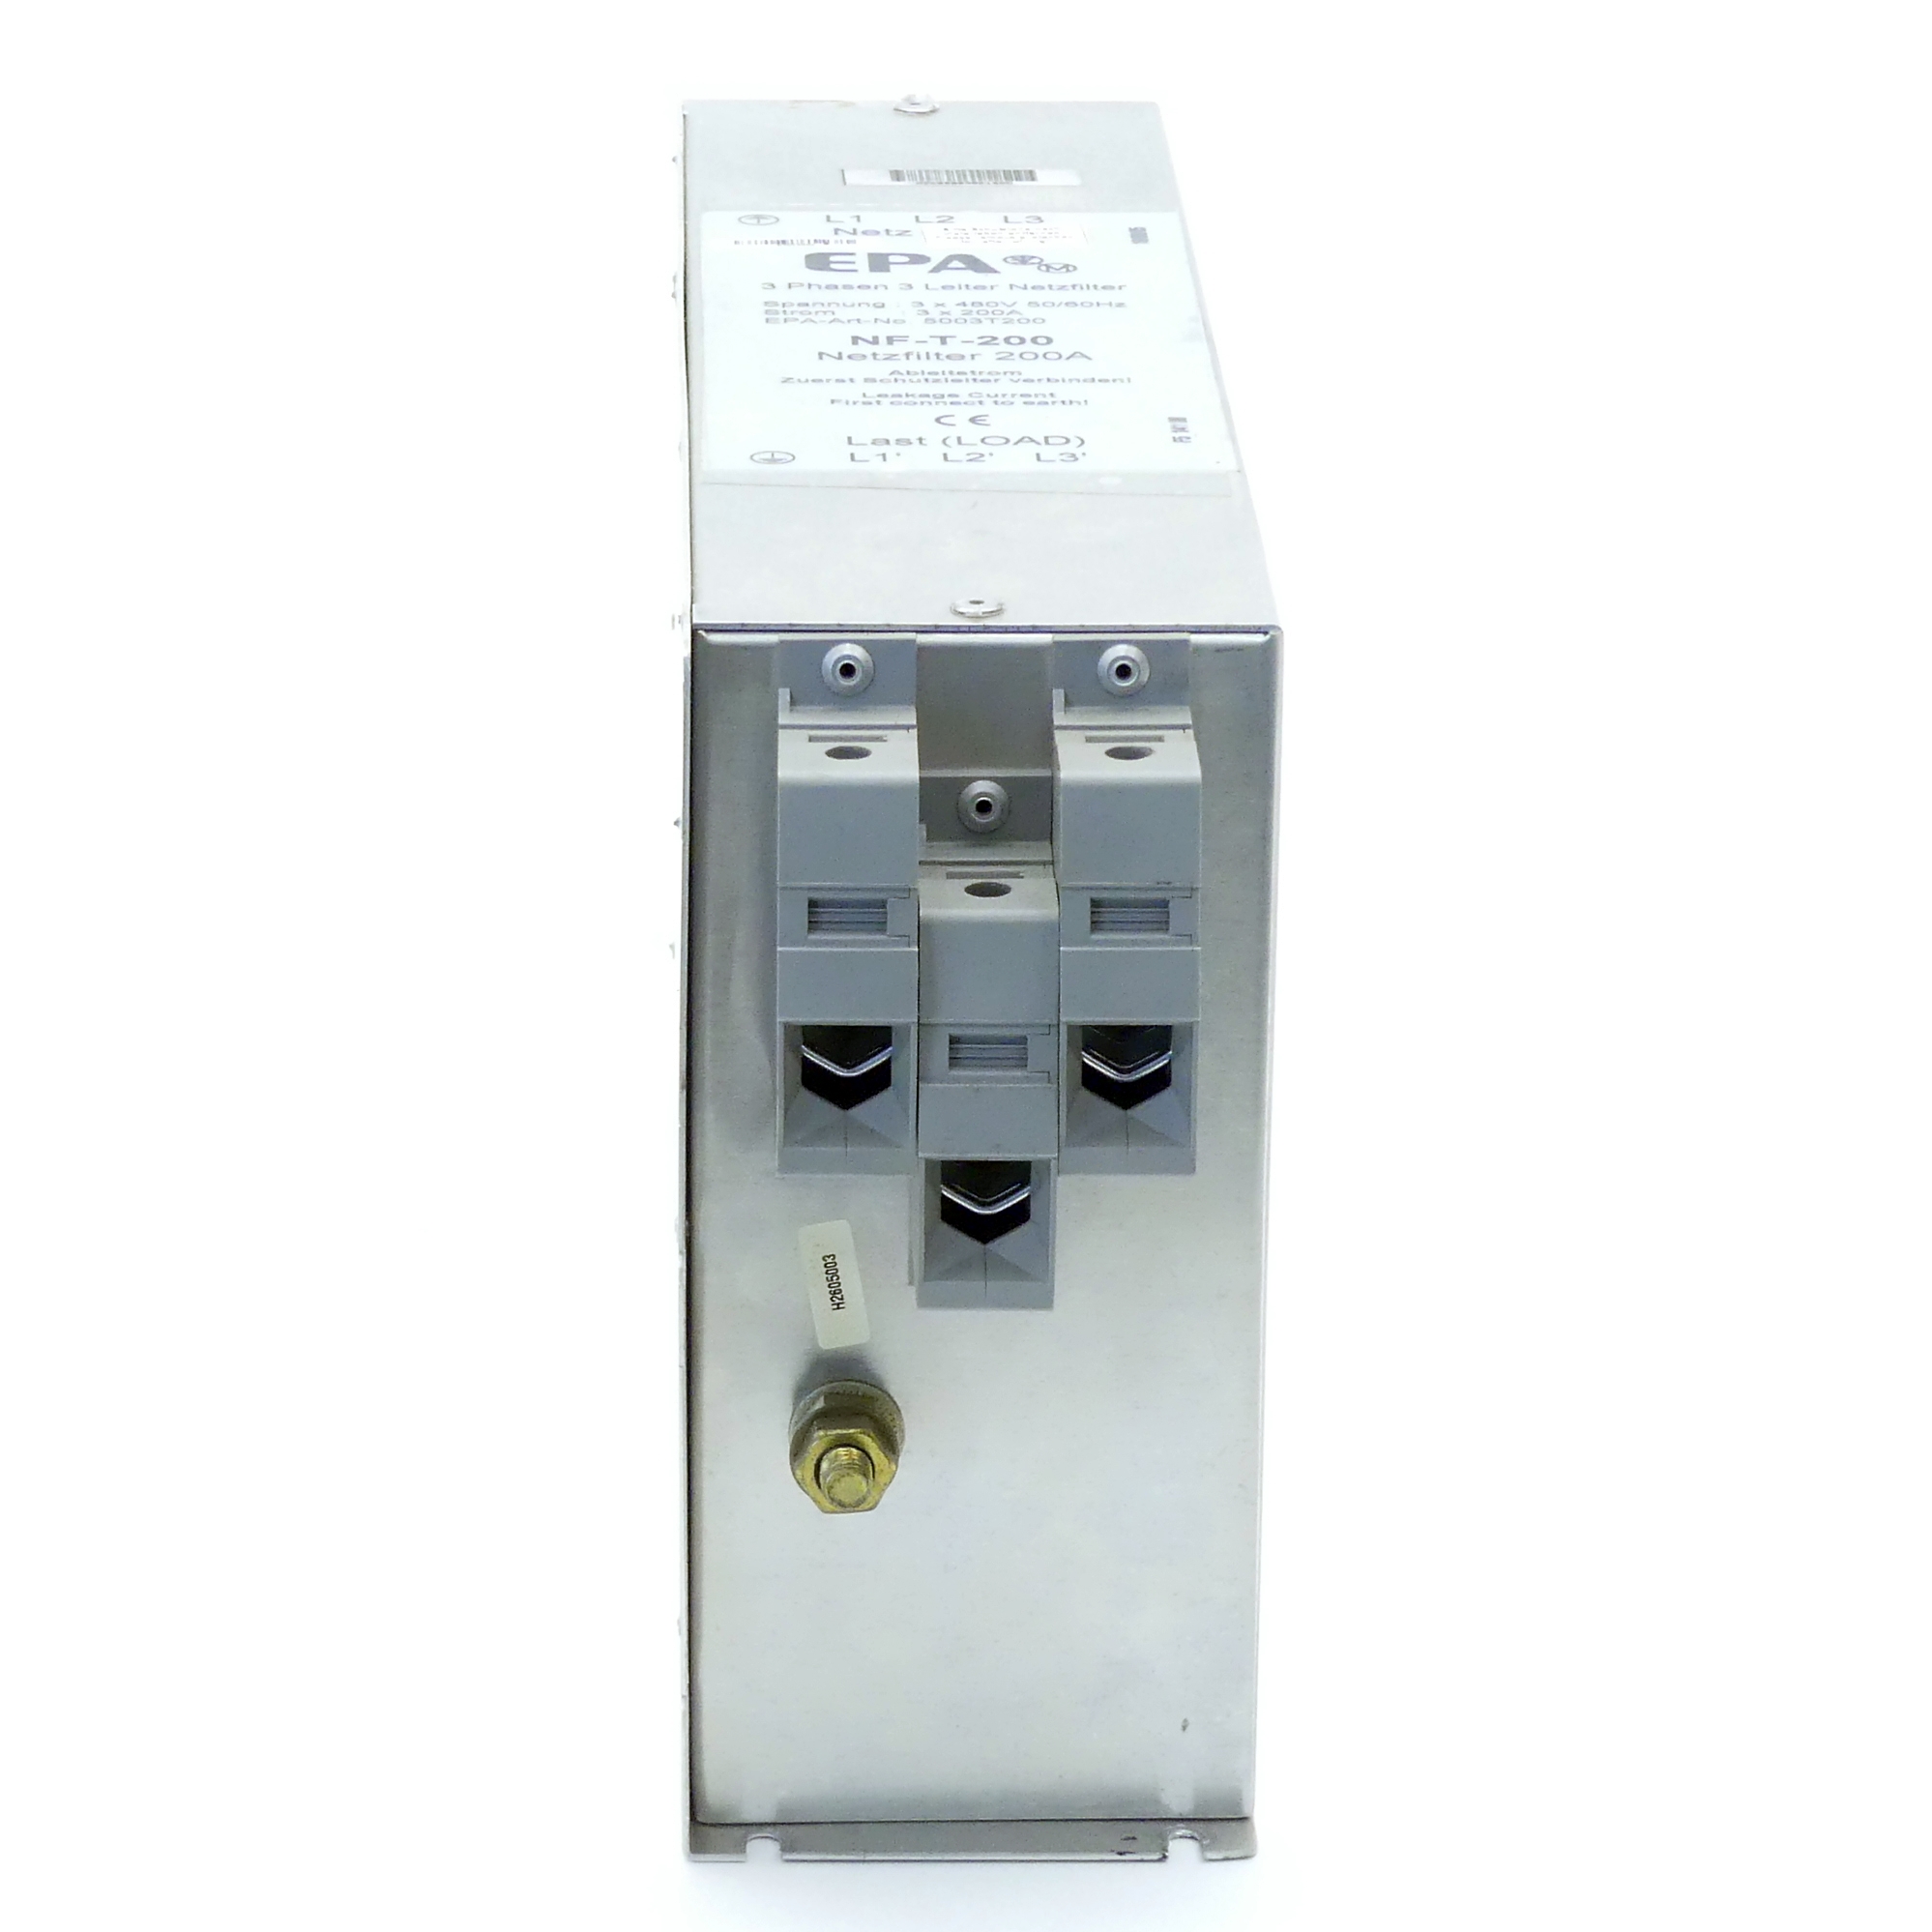 3 phase 3 wire mains filter NF-T-200 